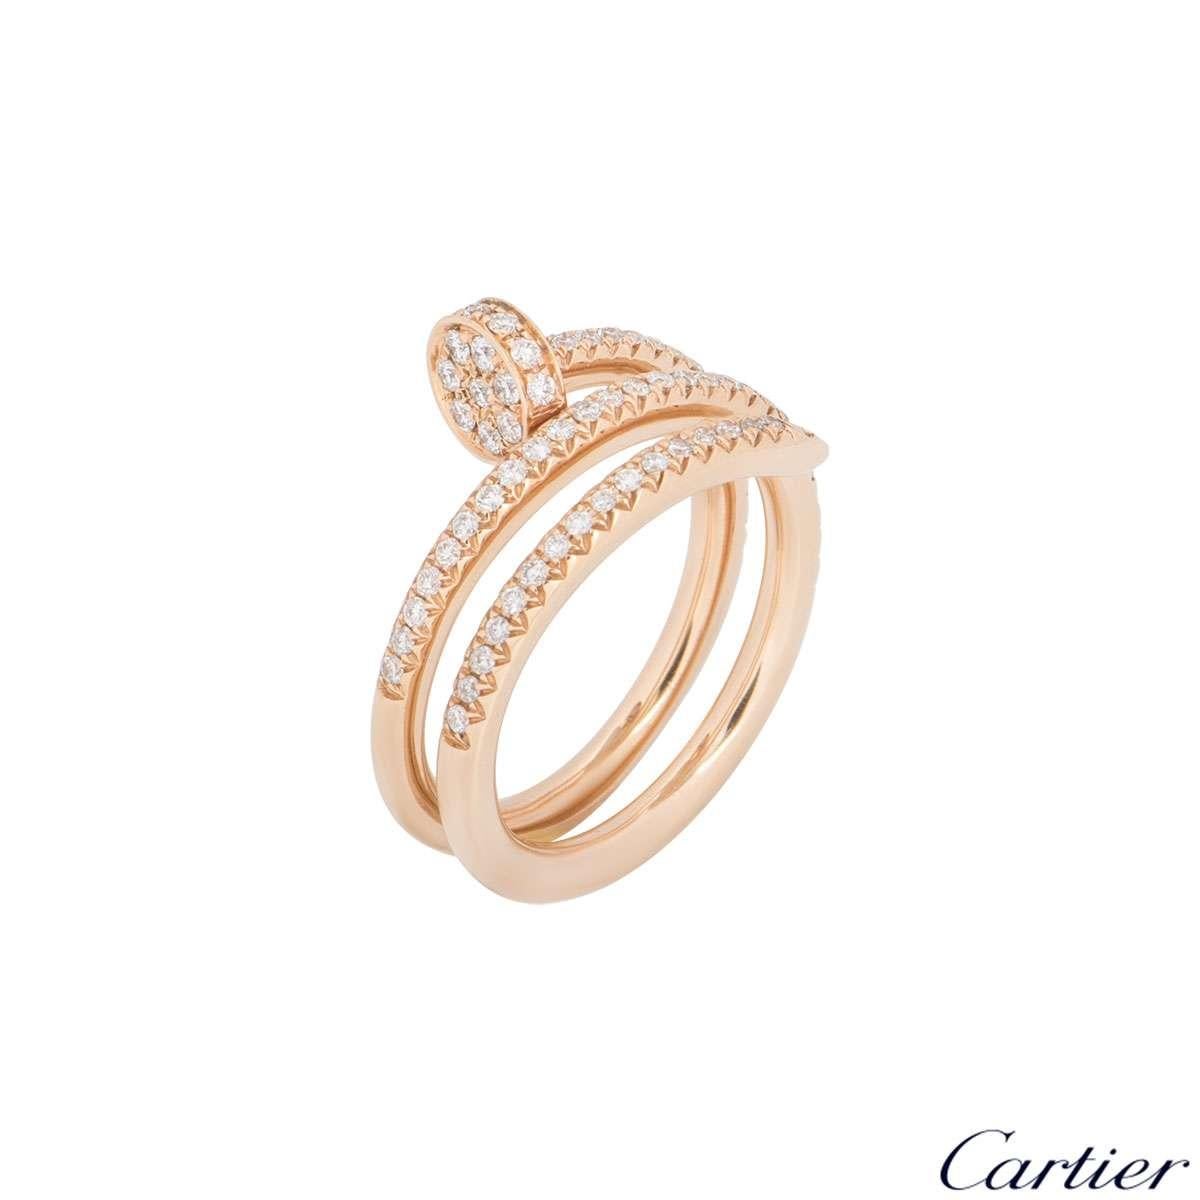 A new/unworn 18k rose gold Cartier diamond ring from the Juste Un Clou collection with complete box and papers. The ring is in the style of a nail wrapping around the finger and has 77 round brilliant cut diamonds pave set with a total weight of